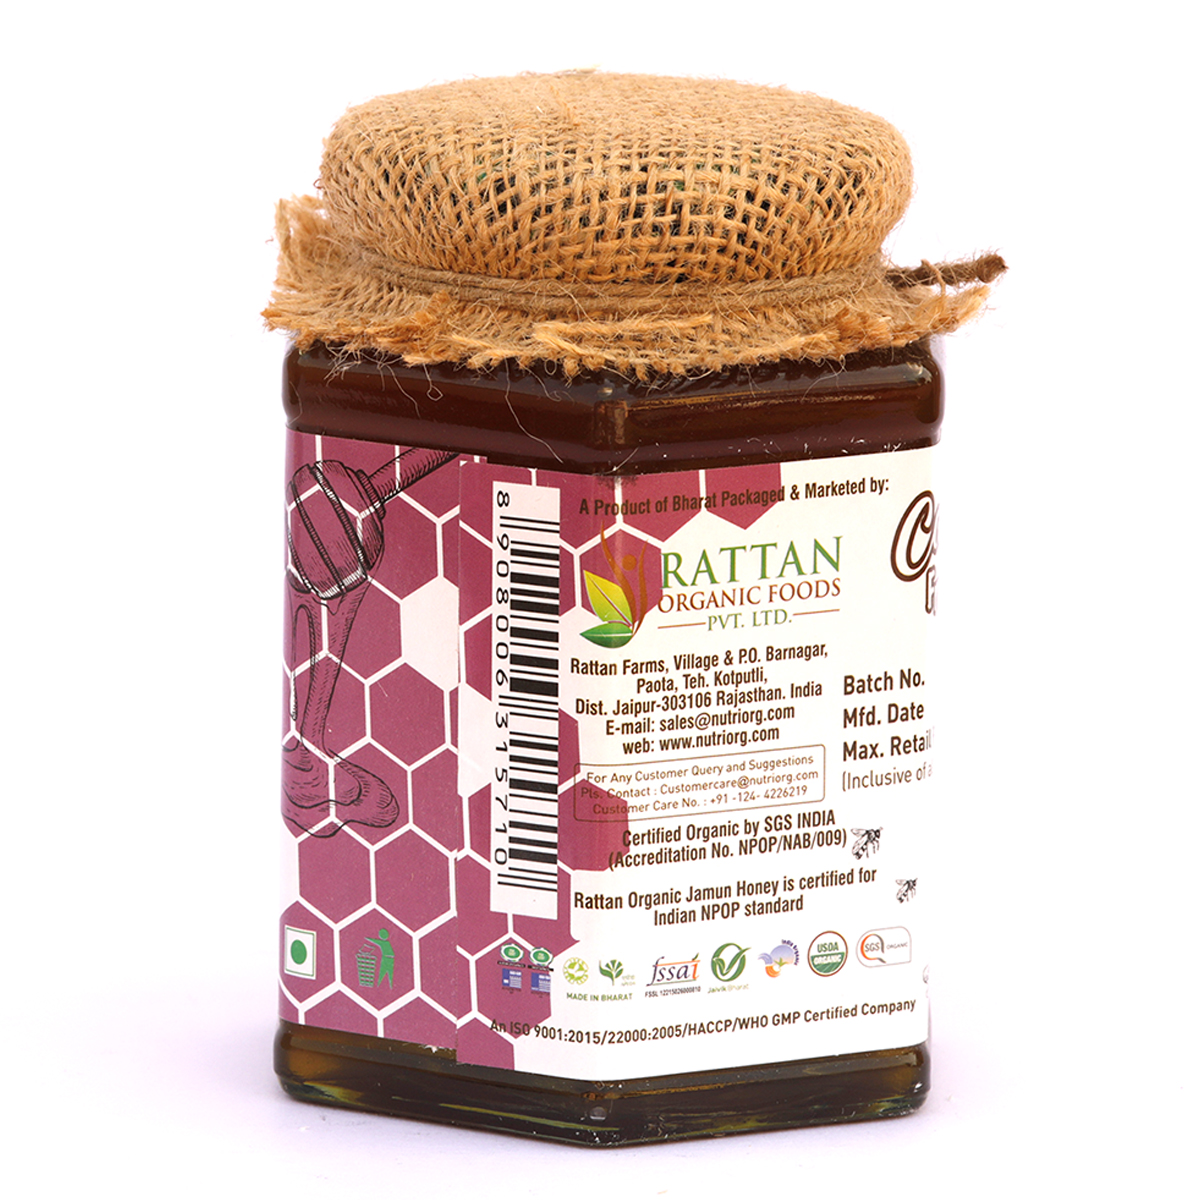 Picture of Nutriorg Certified Organic Honey with Jamun Flavor 500g